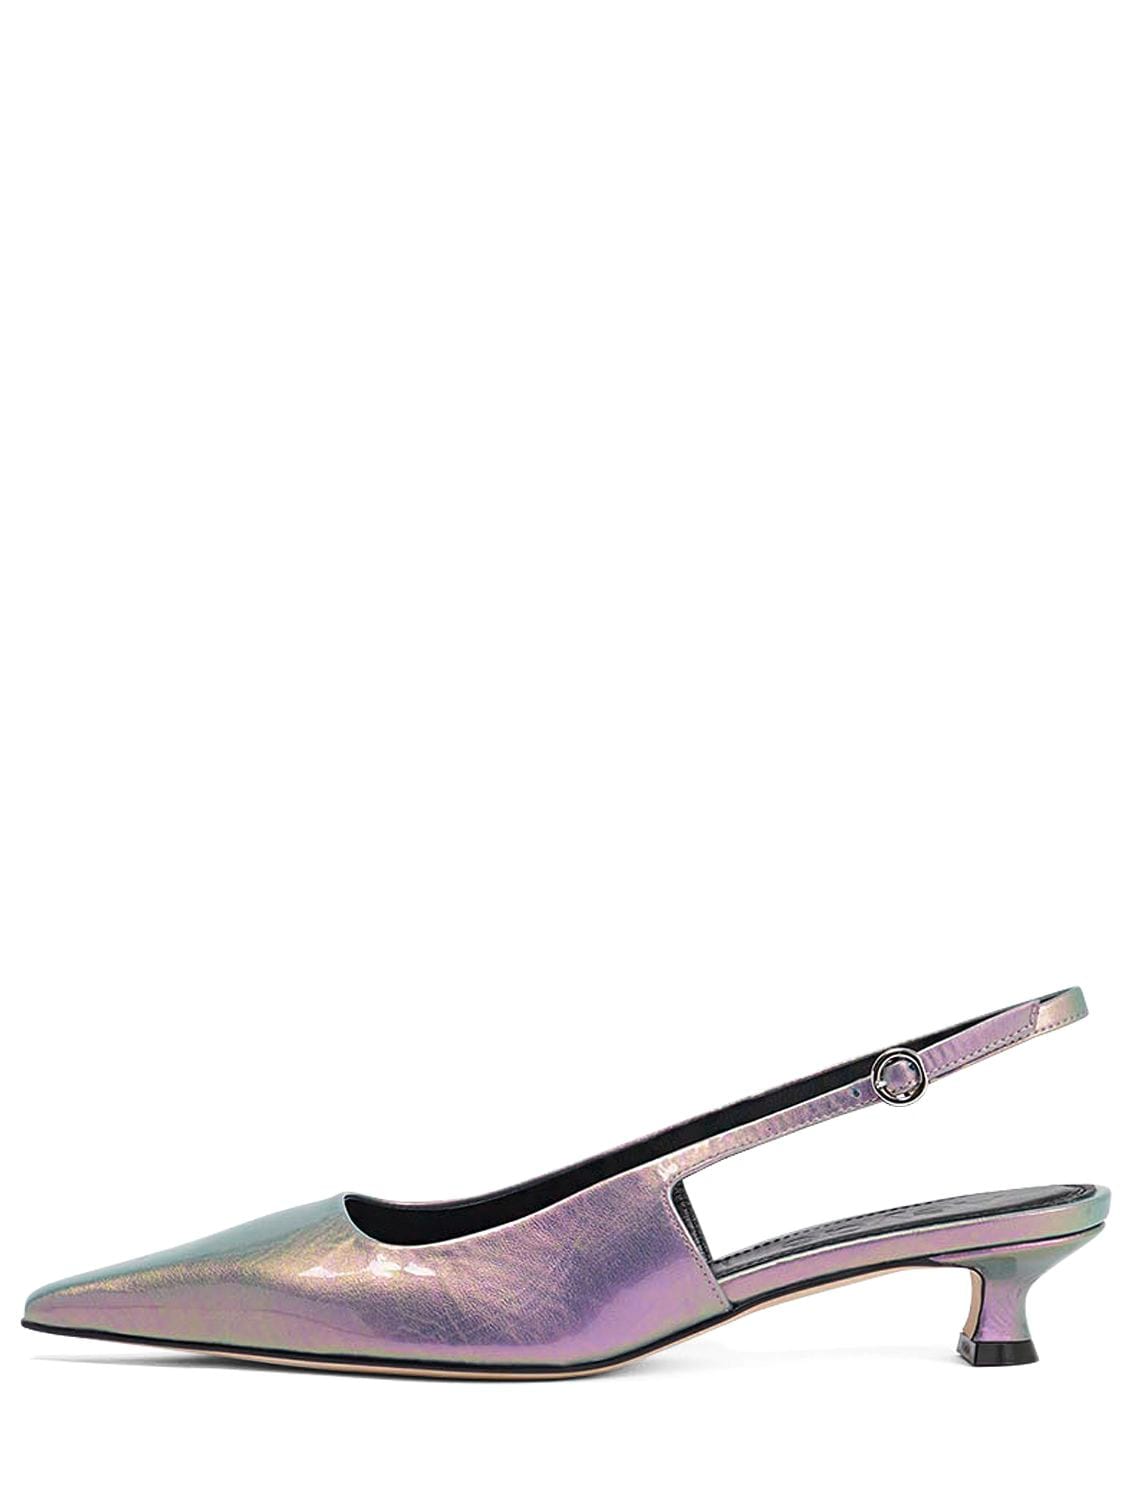 Image of 35mm Catrina Patent Leather Heels